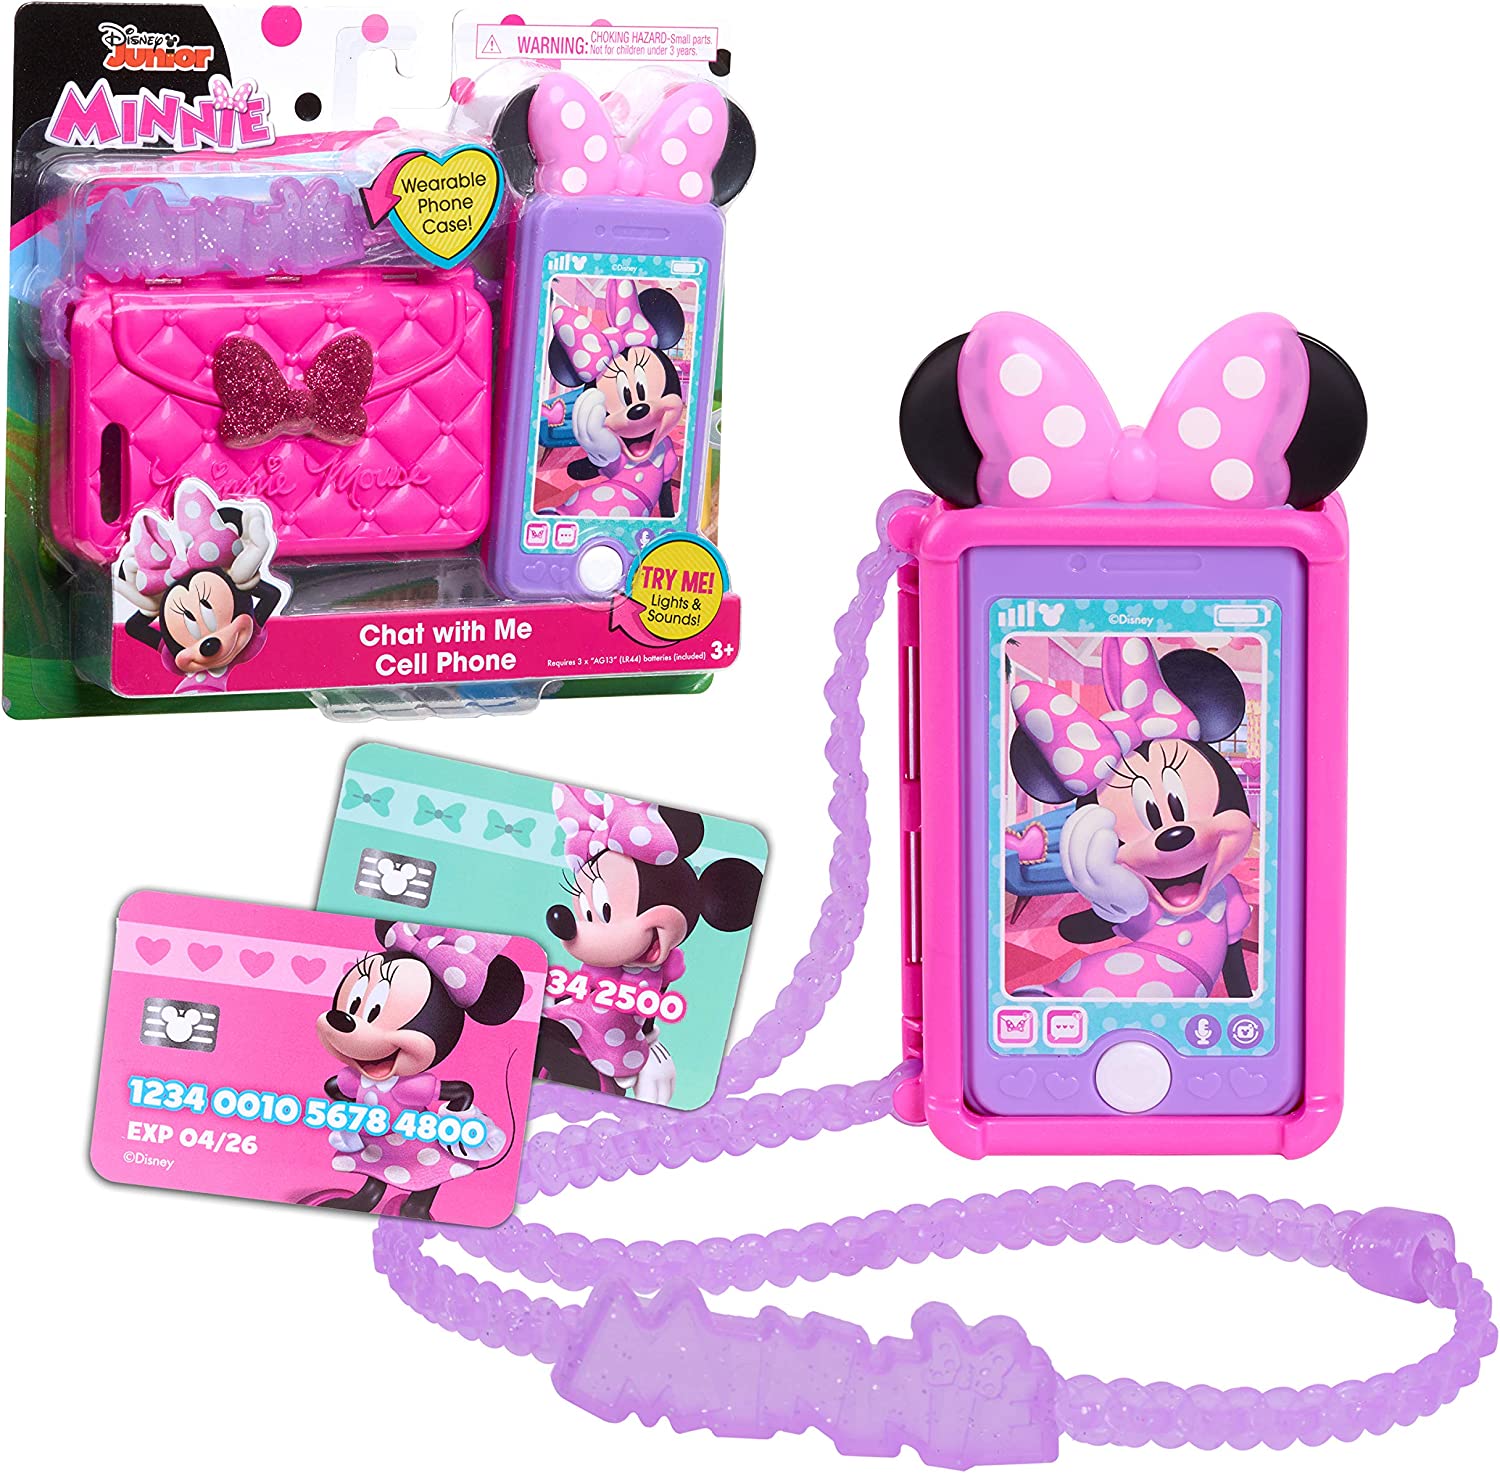 Disney Junior Minnie Mouse Chat w/ Me Cell Phone Playset $5.24